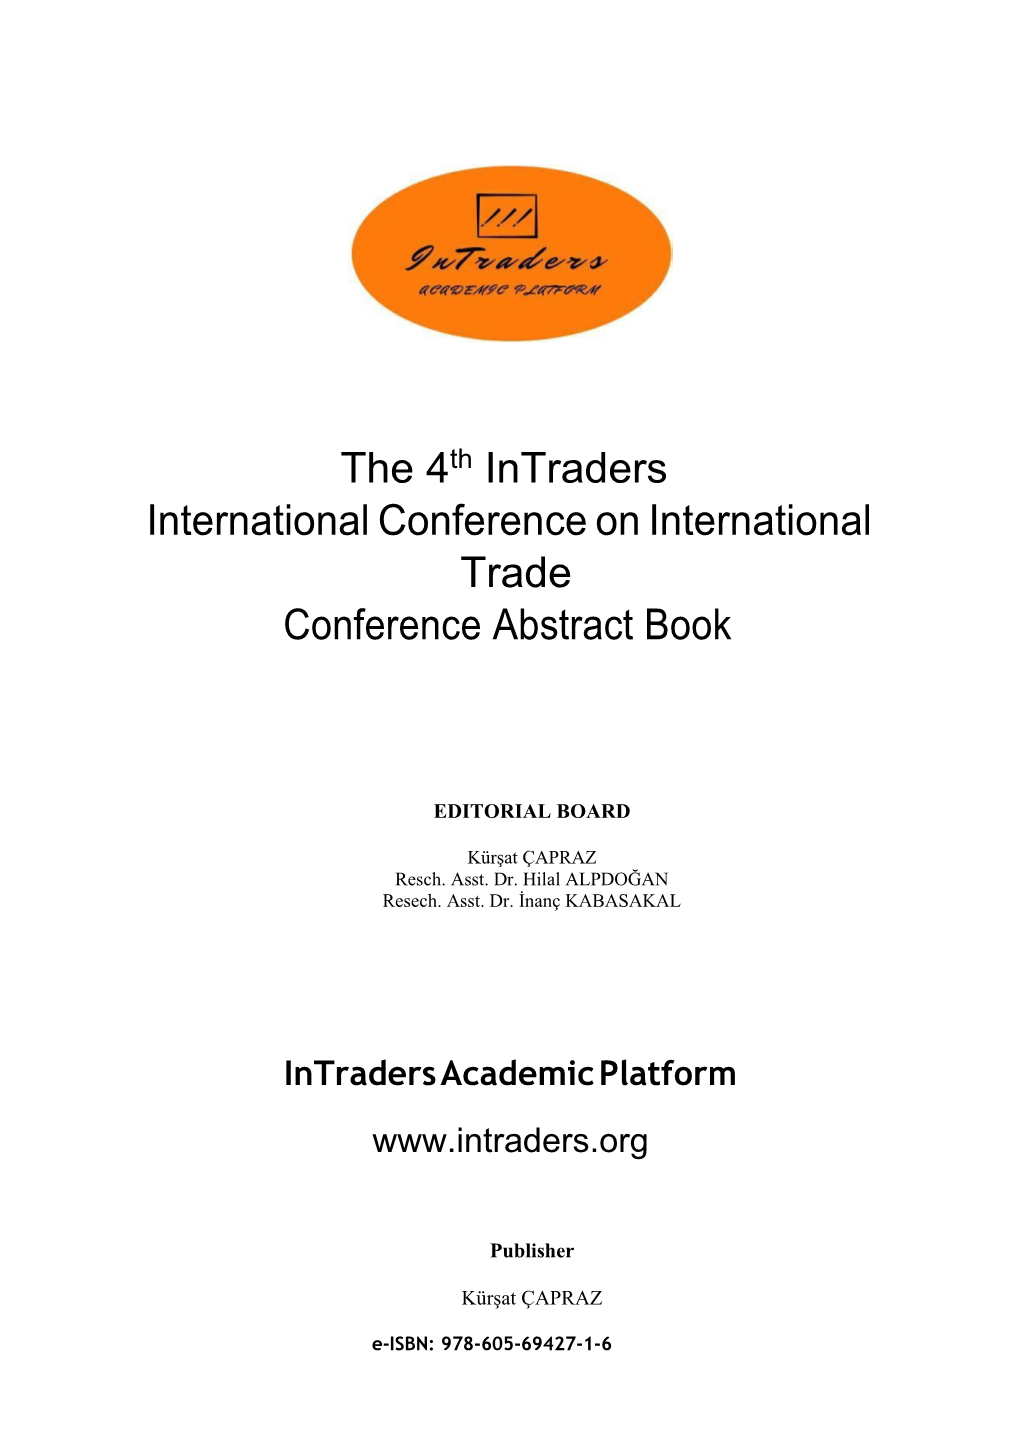 The 4Th Intraders International Conference on International Trade Conference Abstract Book